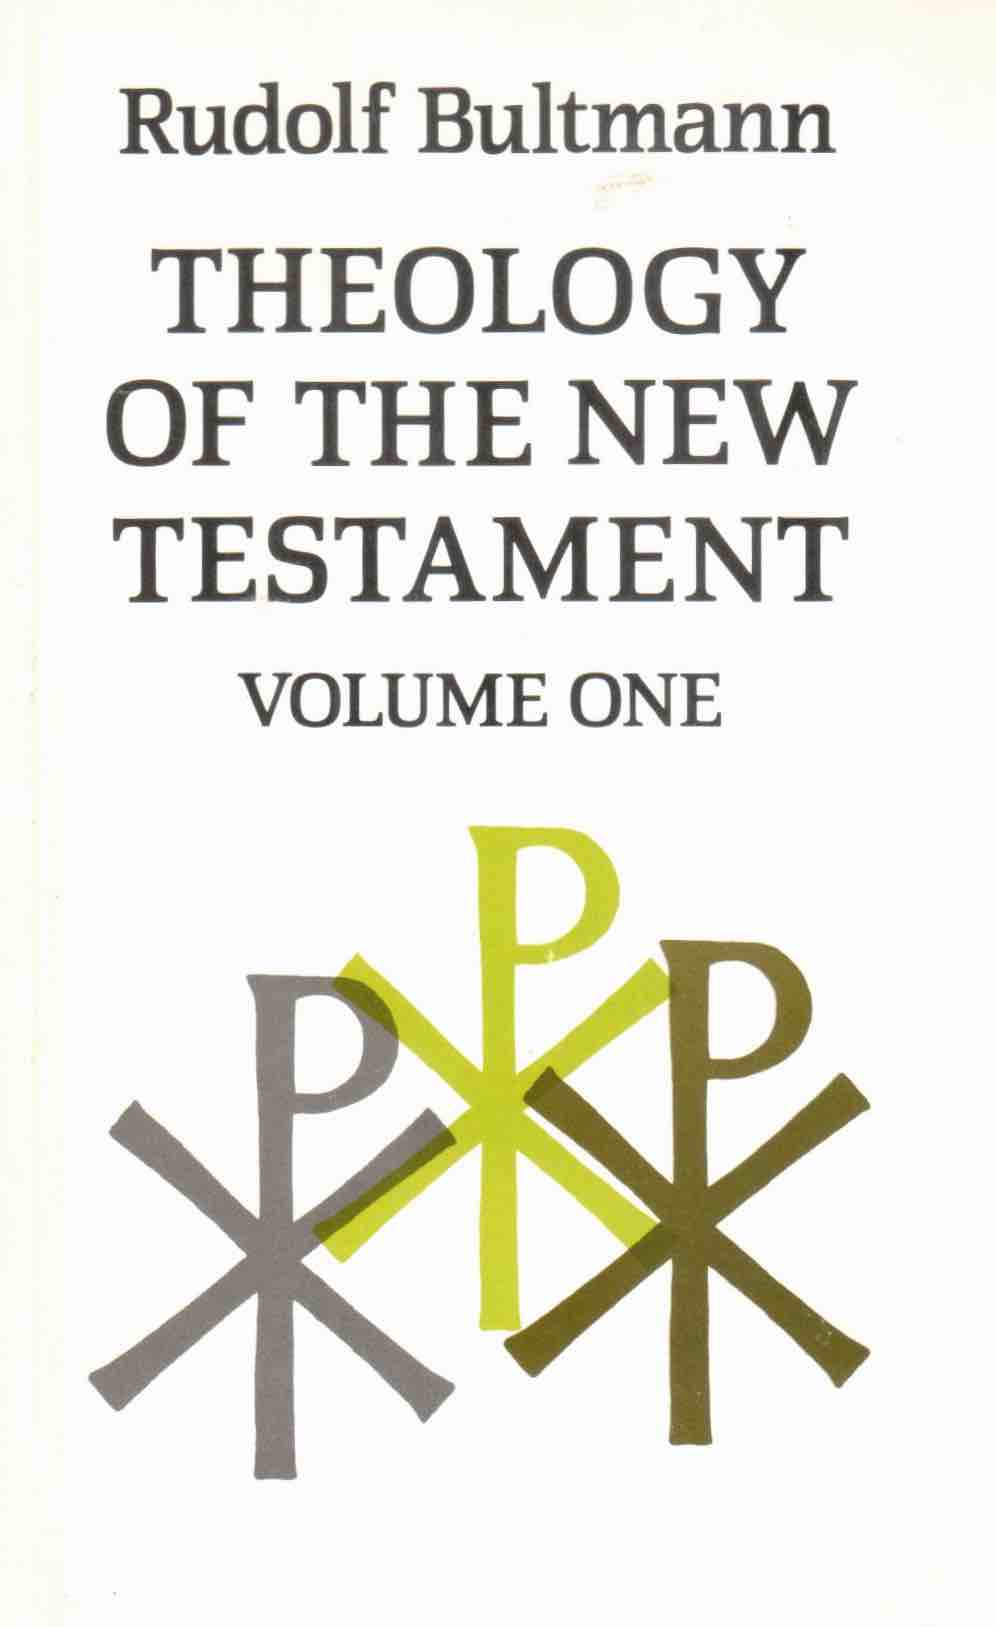 Cover of Theology of the New Testament Vol. One